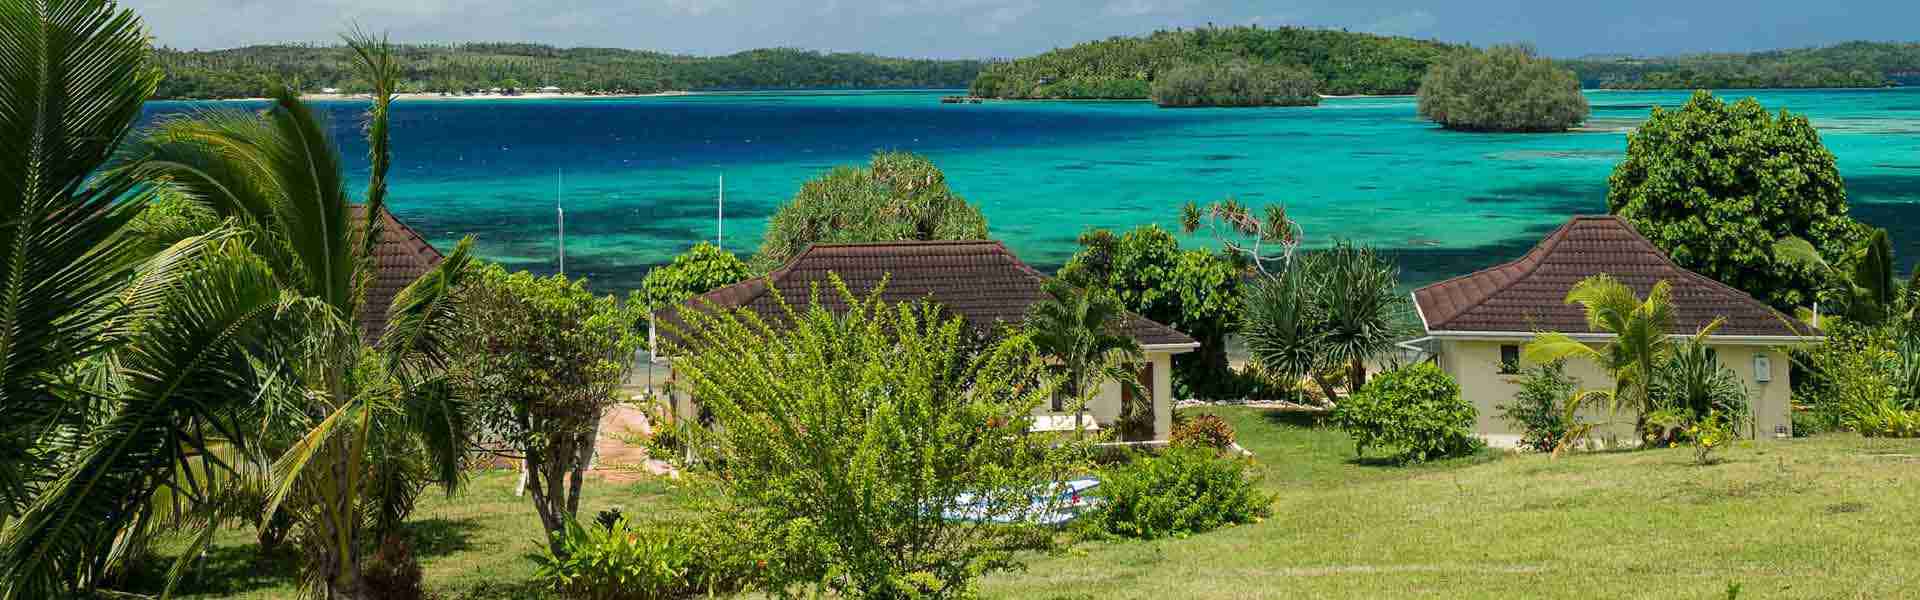 5 Nights’ Tonga Holiday w/ Whale Watching Tours, All Meals & More